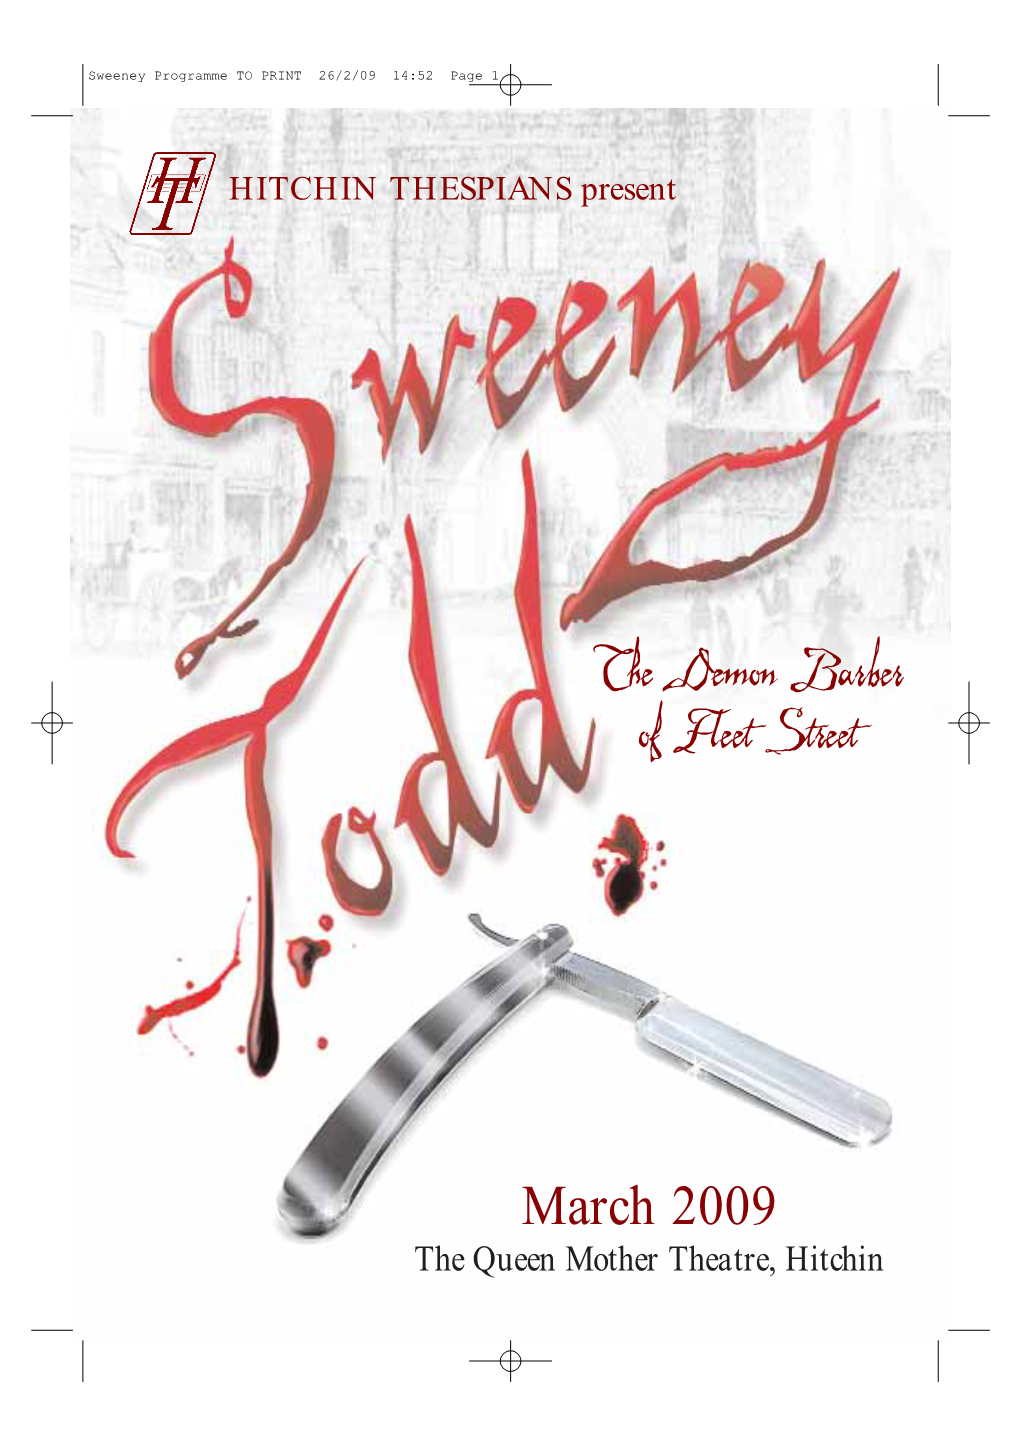 March 2009 the Queen Mother Theatre, Hitchin Sweeney Programme to PRINT 26/2/09 14:52 Page 2